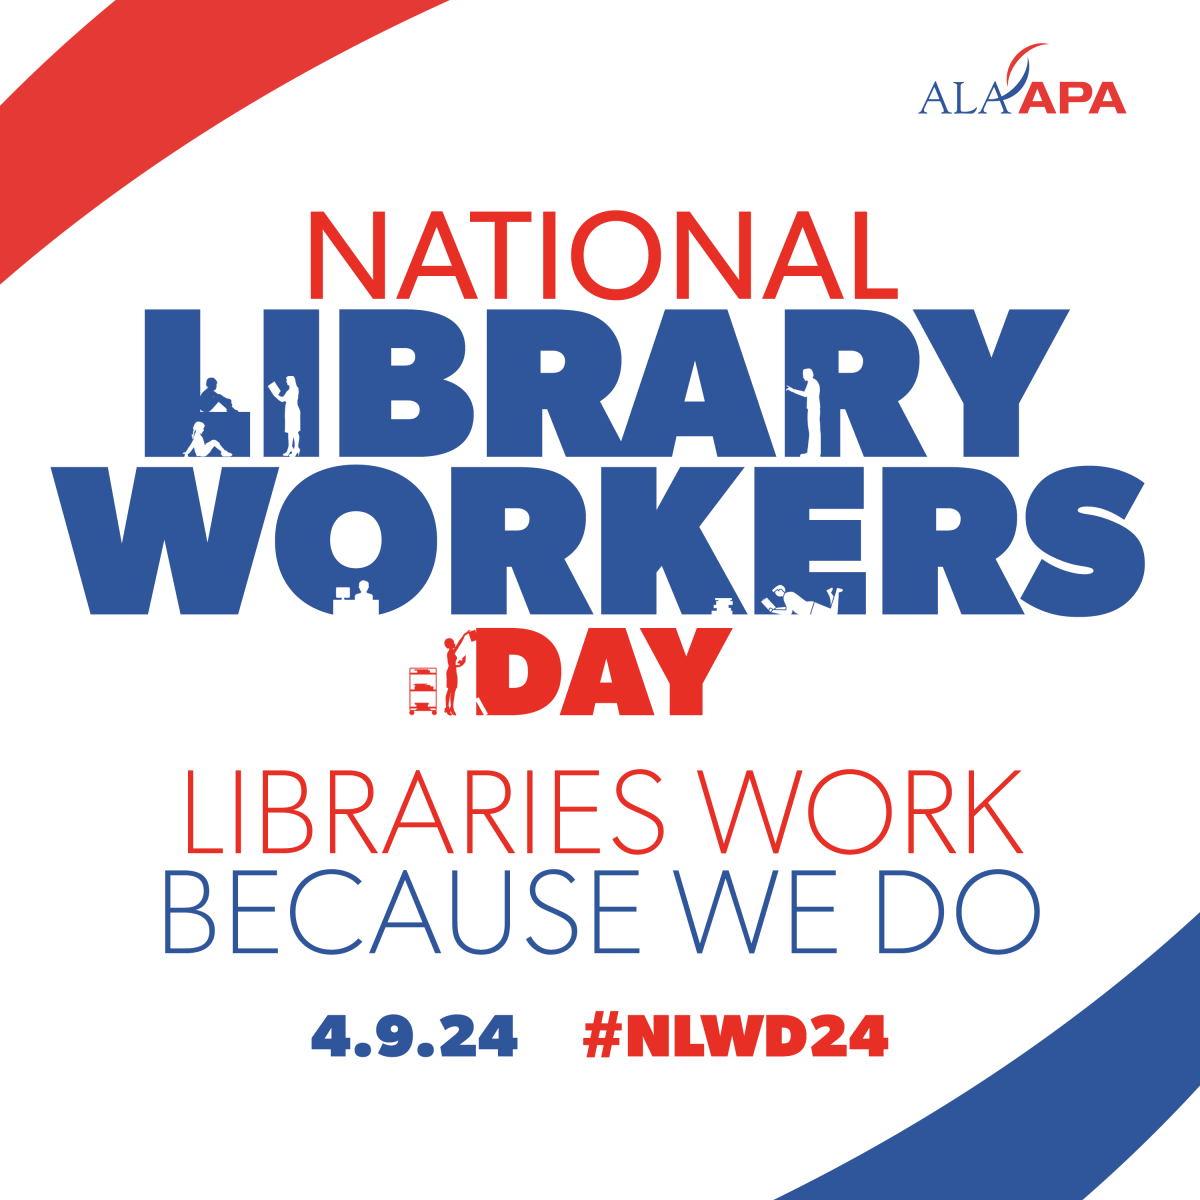 National Library Workers Day : Libraries work because we do